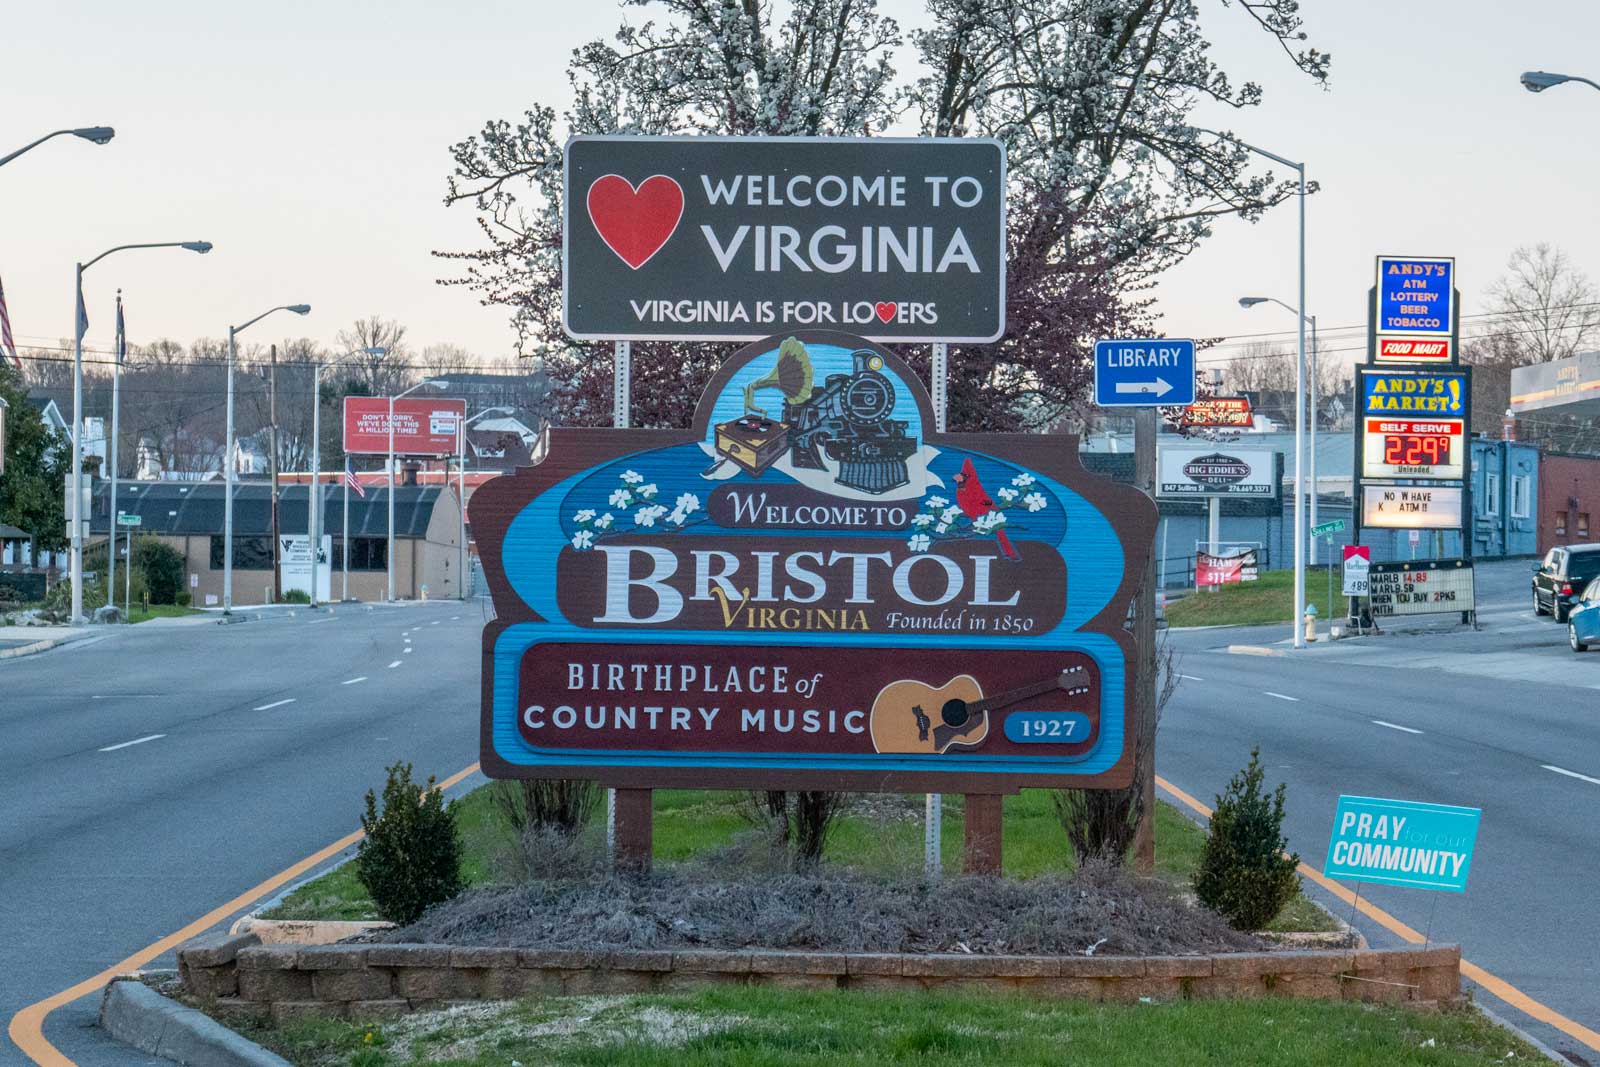 Welcome to Bristol Virginia Birthplace of County Music